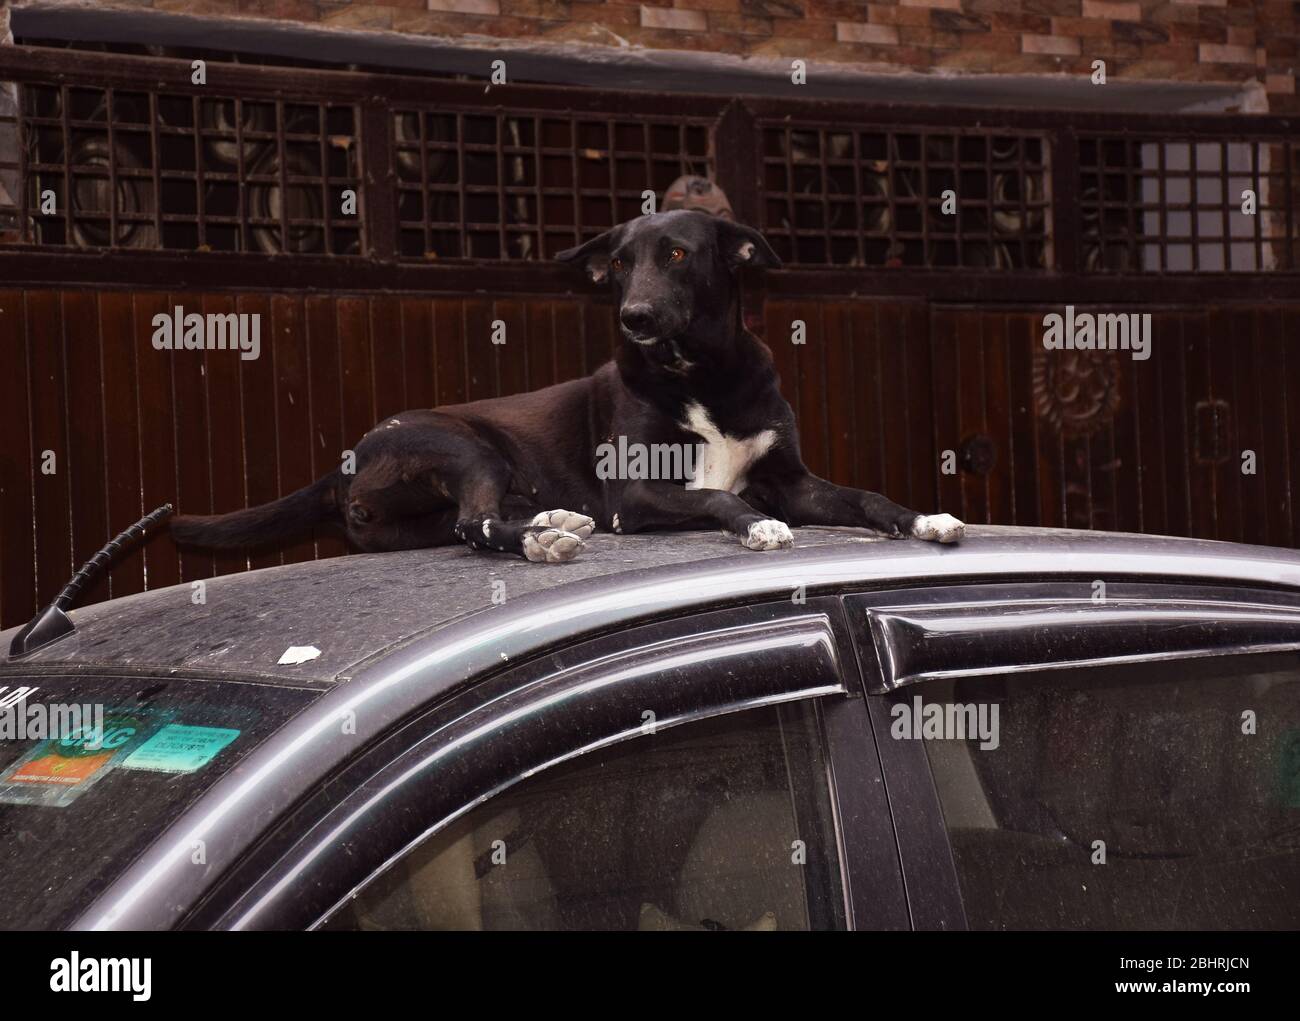 Strange, Weird and Funny Animals - Funny Indian Black Street or Stray Dog sitting on the roof of a car Stock Photo